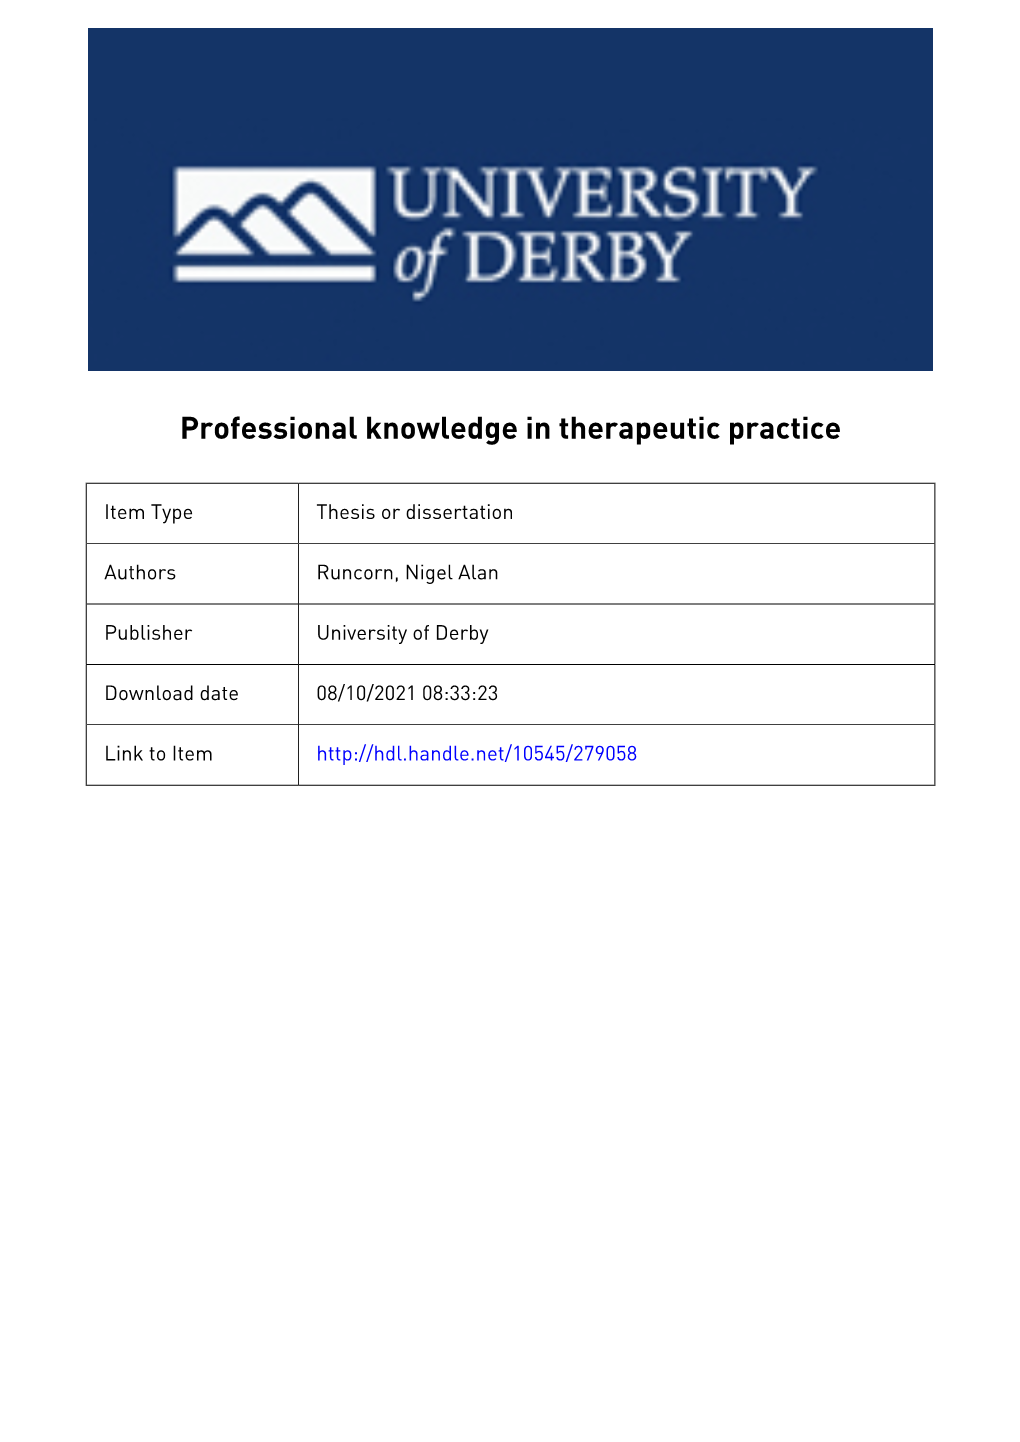 University of Derby Professional Knowledge In